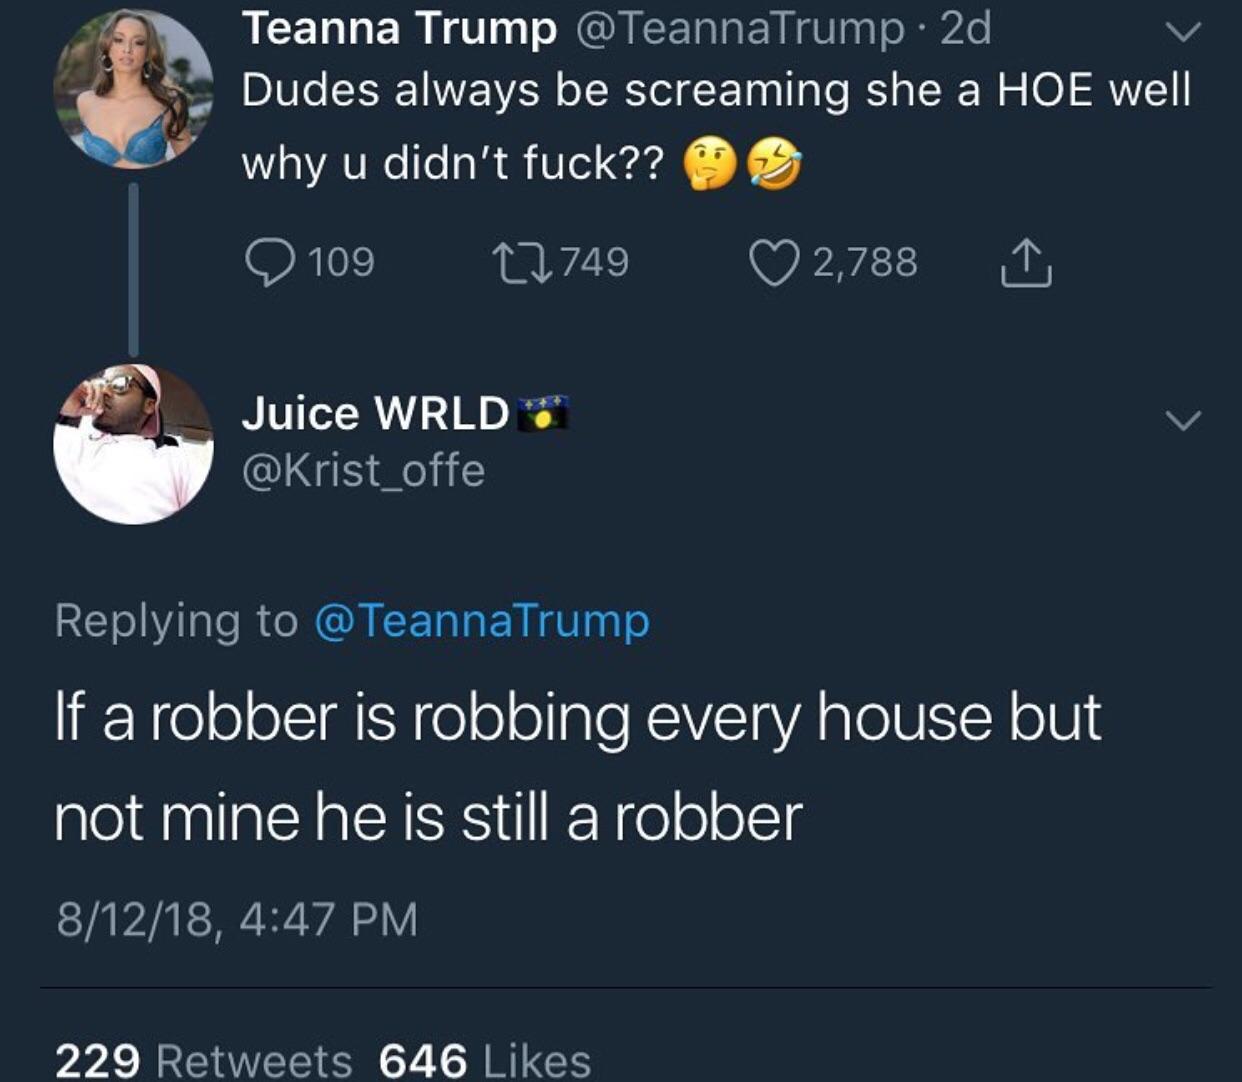 black twitter savage - Teanna Trump Trump. 2d Dudes always be screaming she a Hoe well why u didn't fuck?? 3 910927749 2,788 I Juice Wrld Trump If a robber is robbing every house but not mine he is still a robber 81218, 229 646